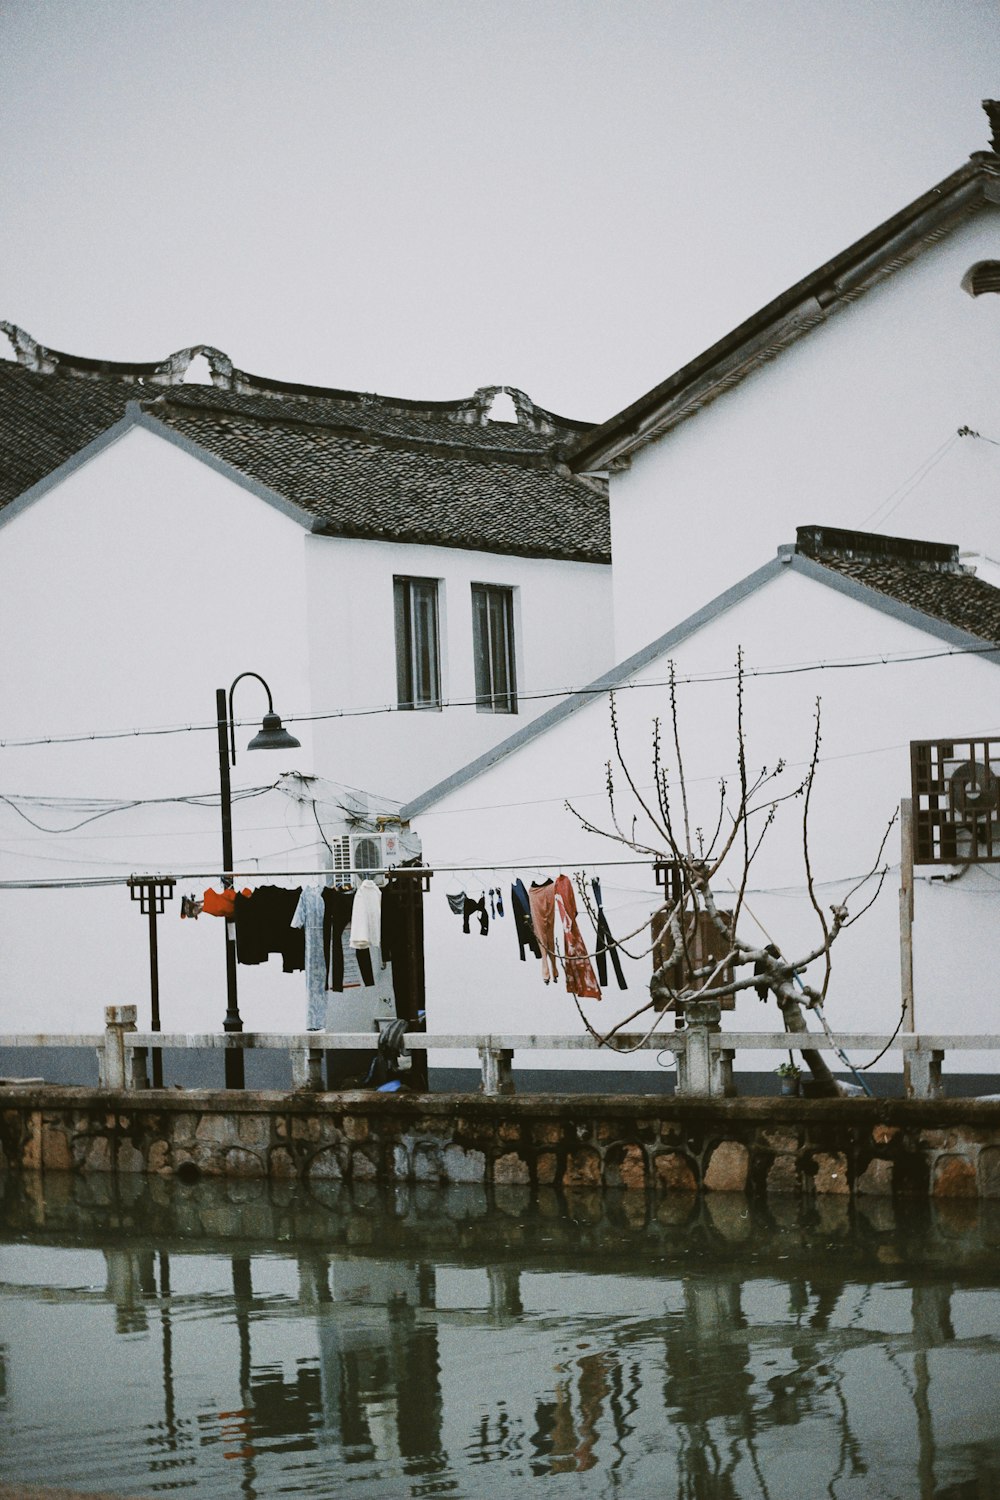 clothes hanging out to dry in front of a house